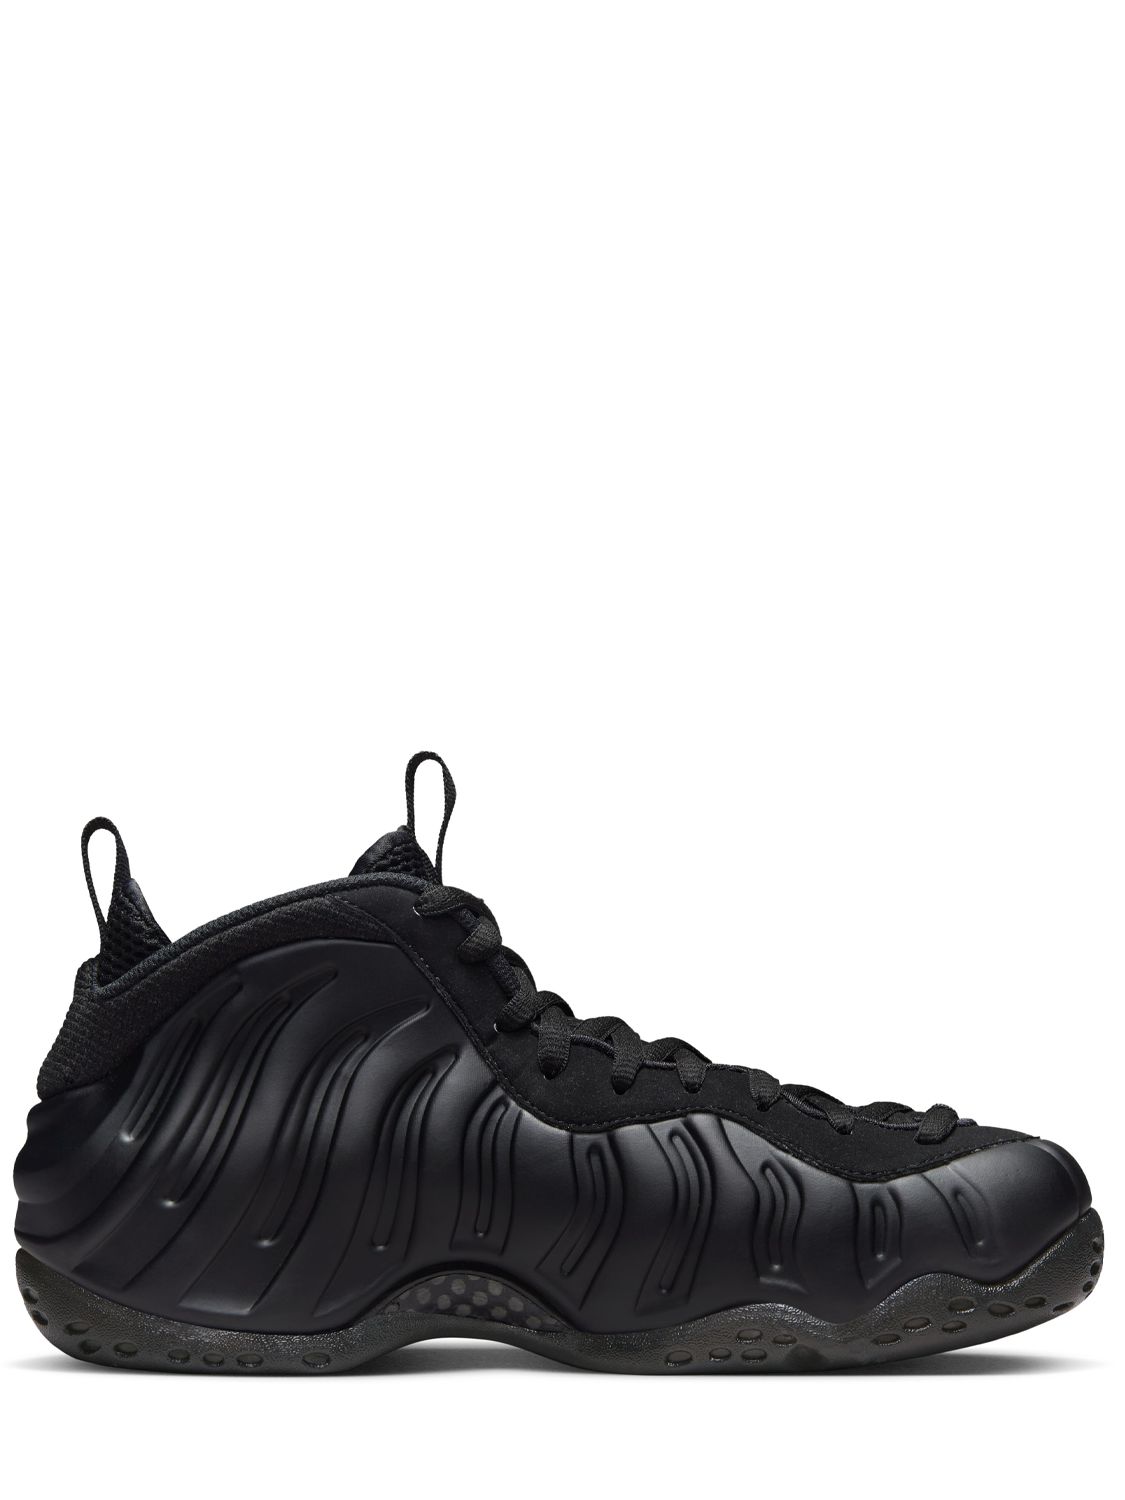 Image of Air Foamposite One Sneakers